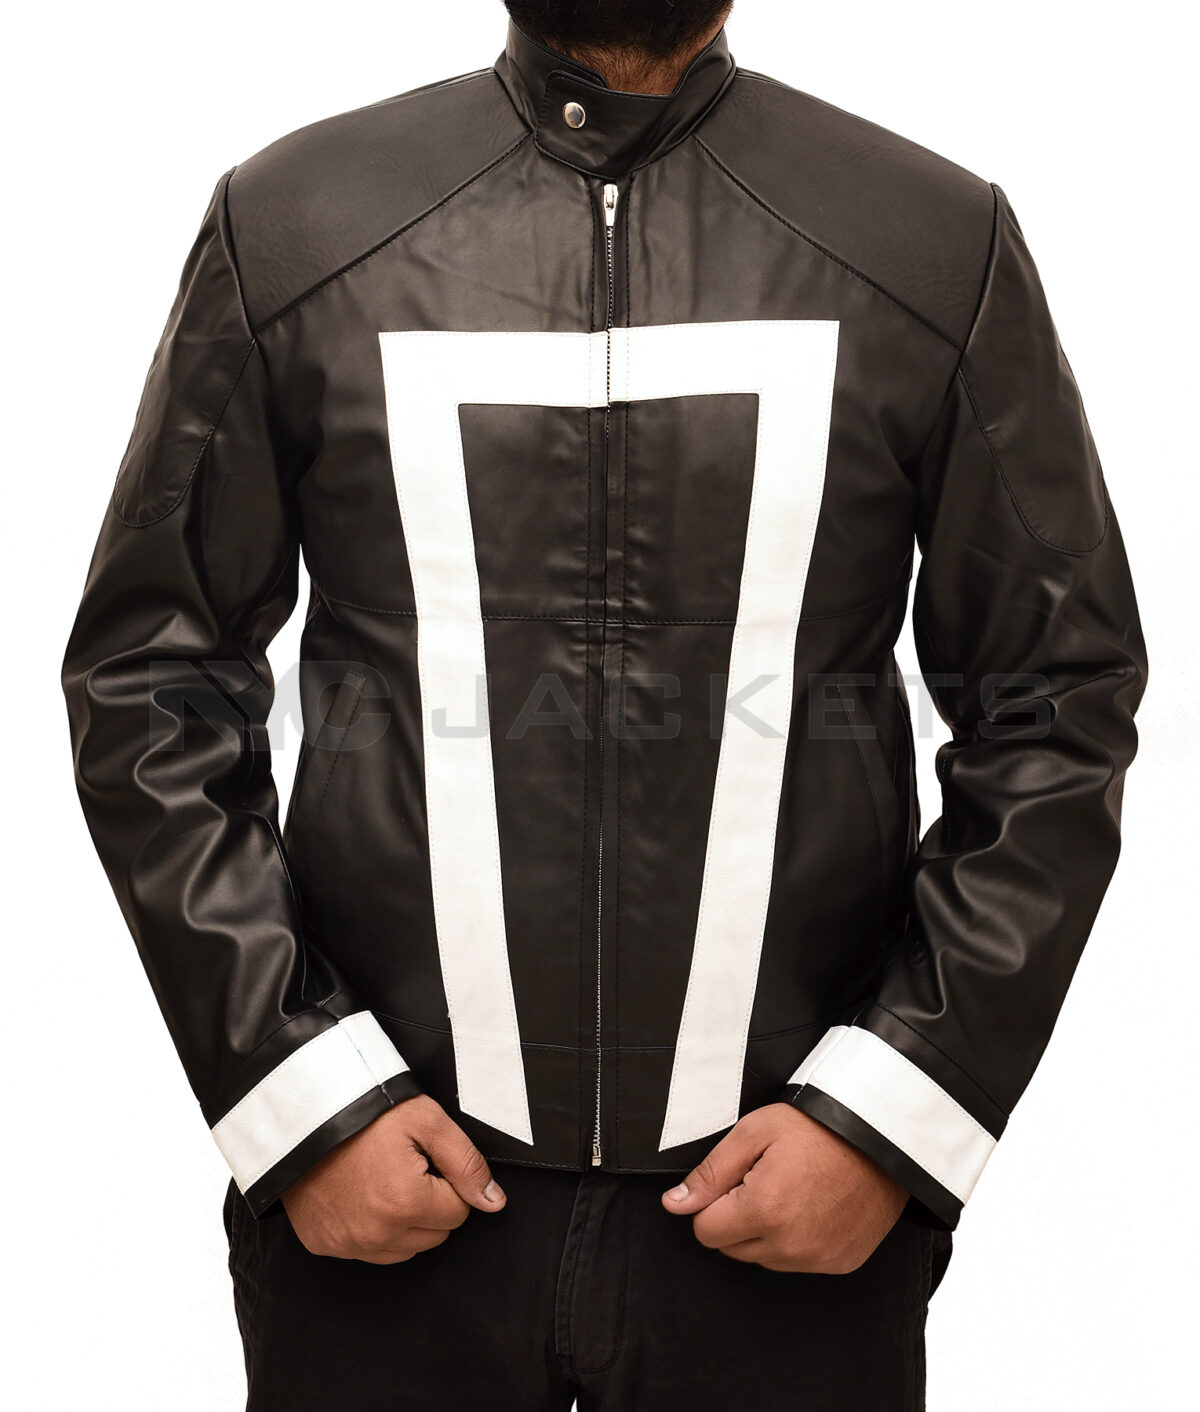 Agents of Shield Ghost Rider Jacket